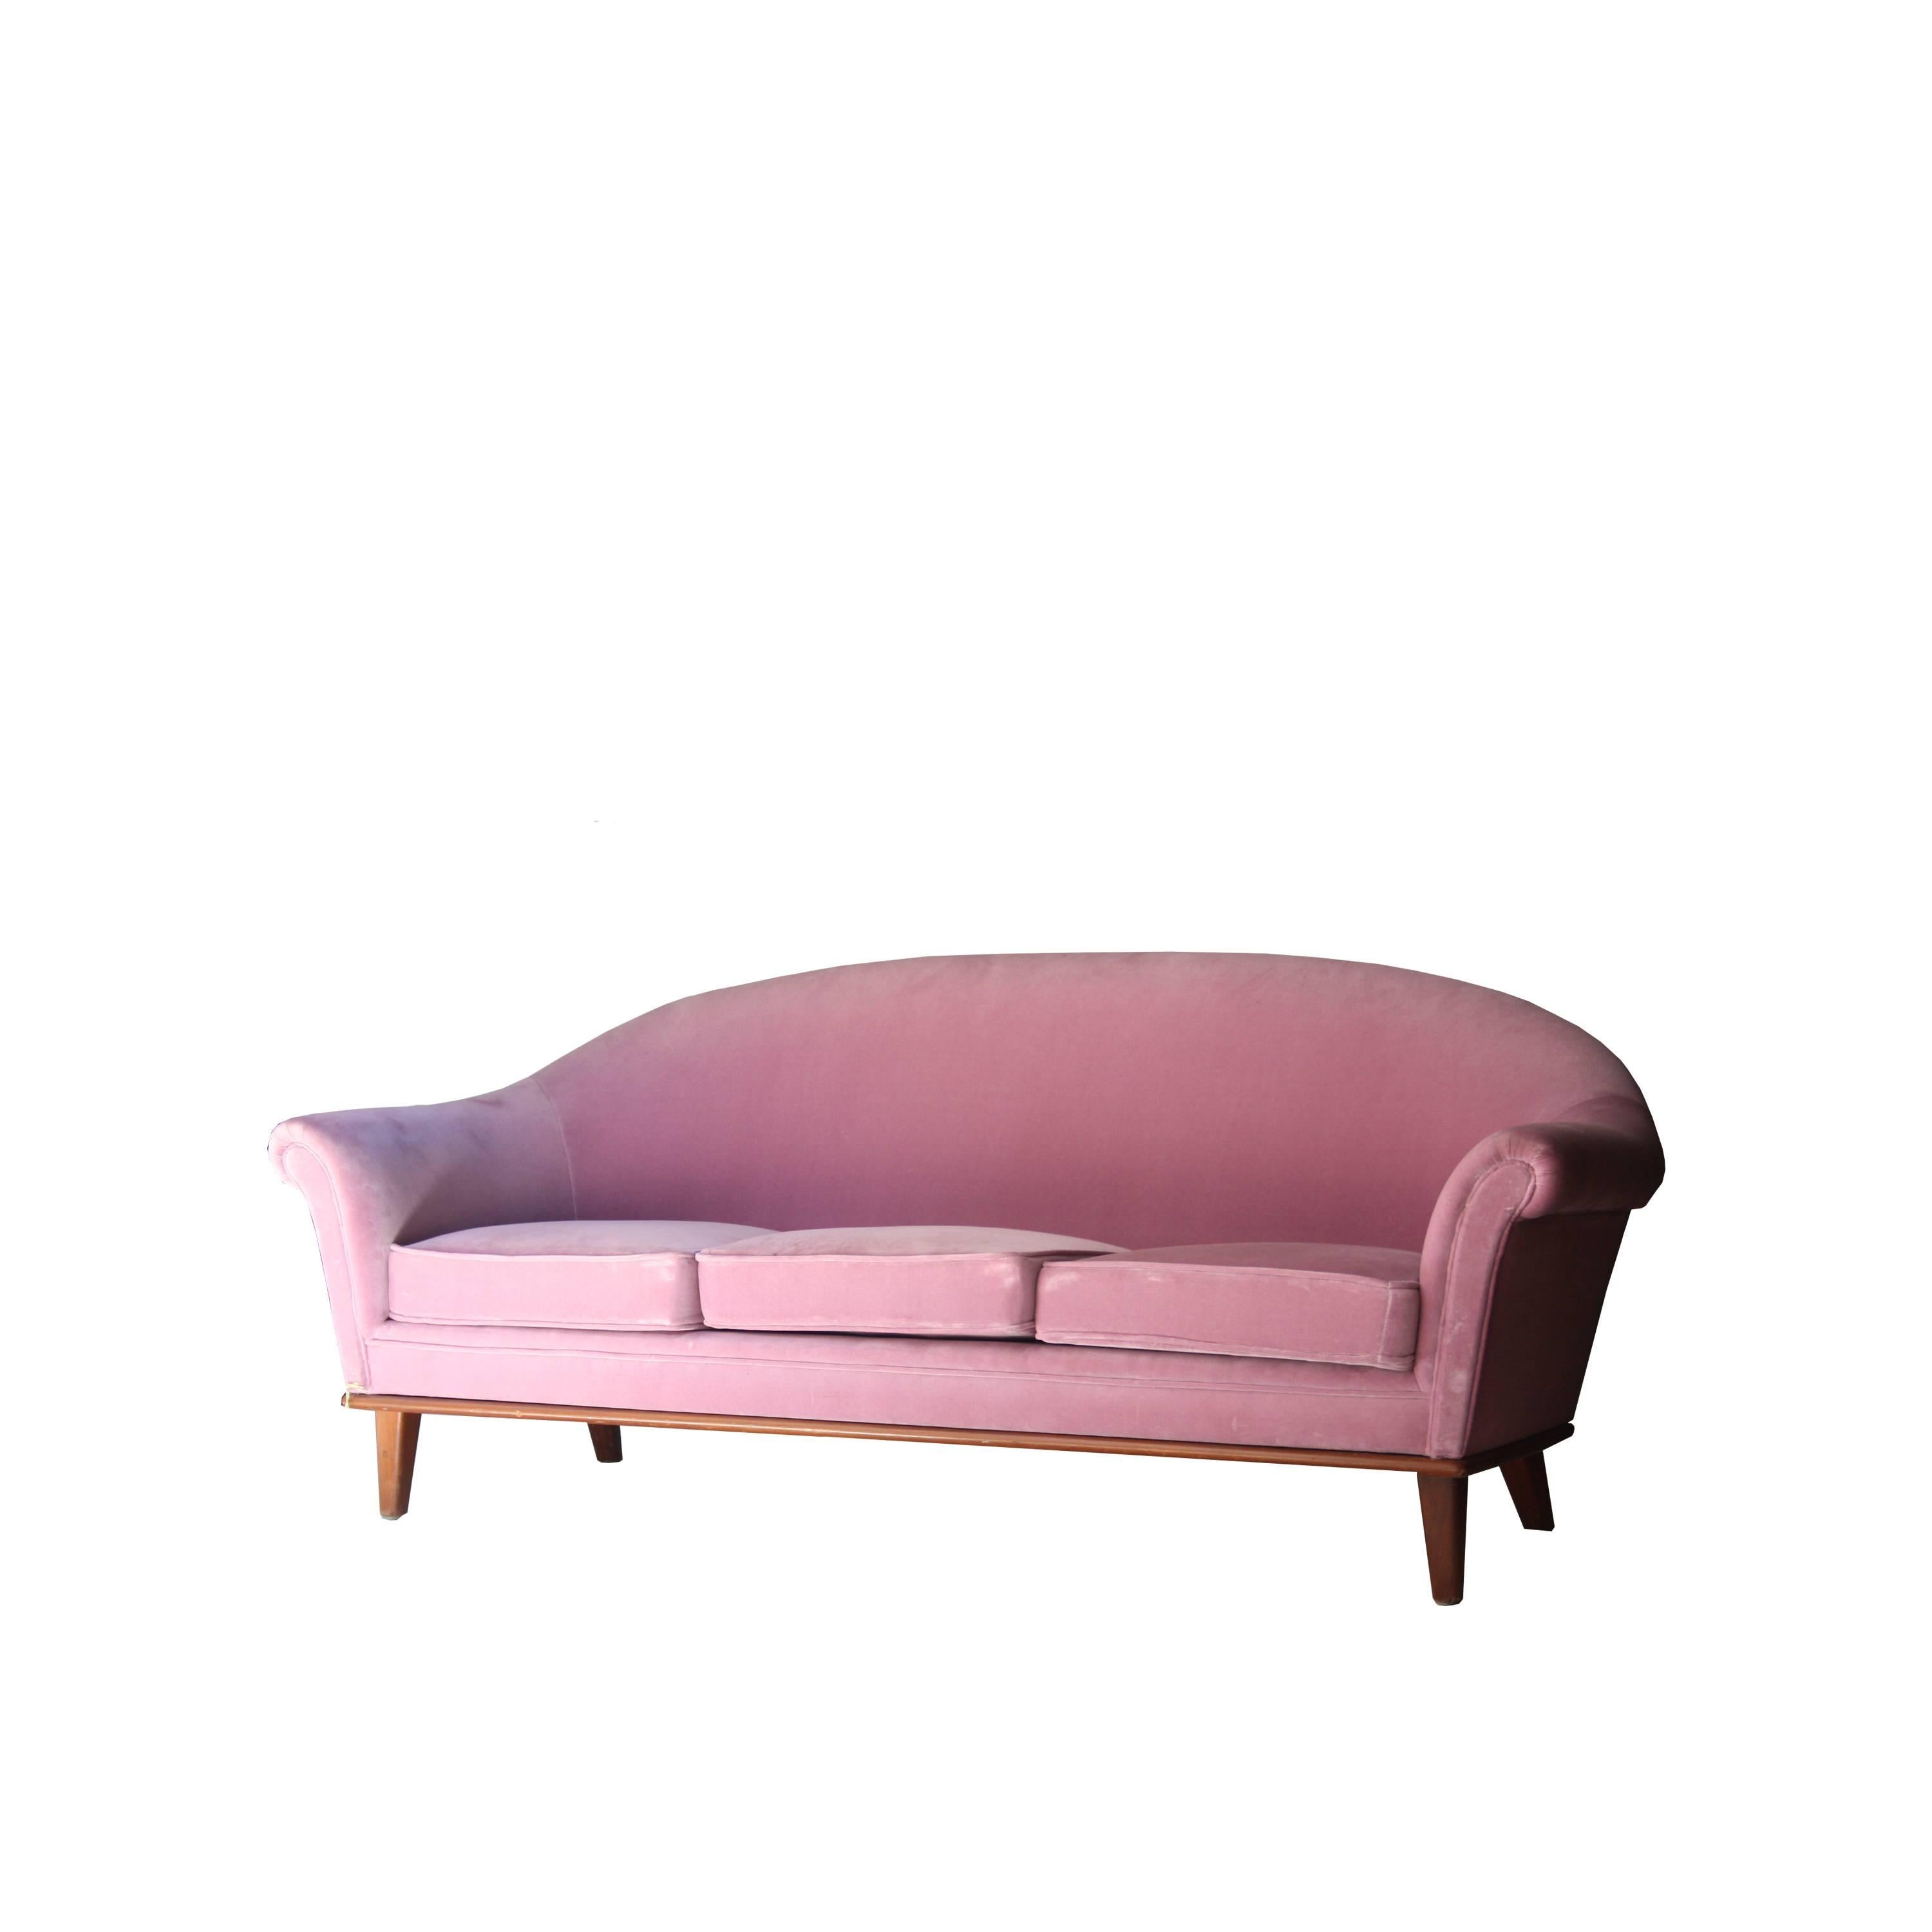 Three-seat sofa with structure in solid wood, upholstered in pink cotton velvet.